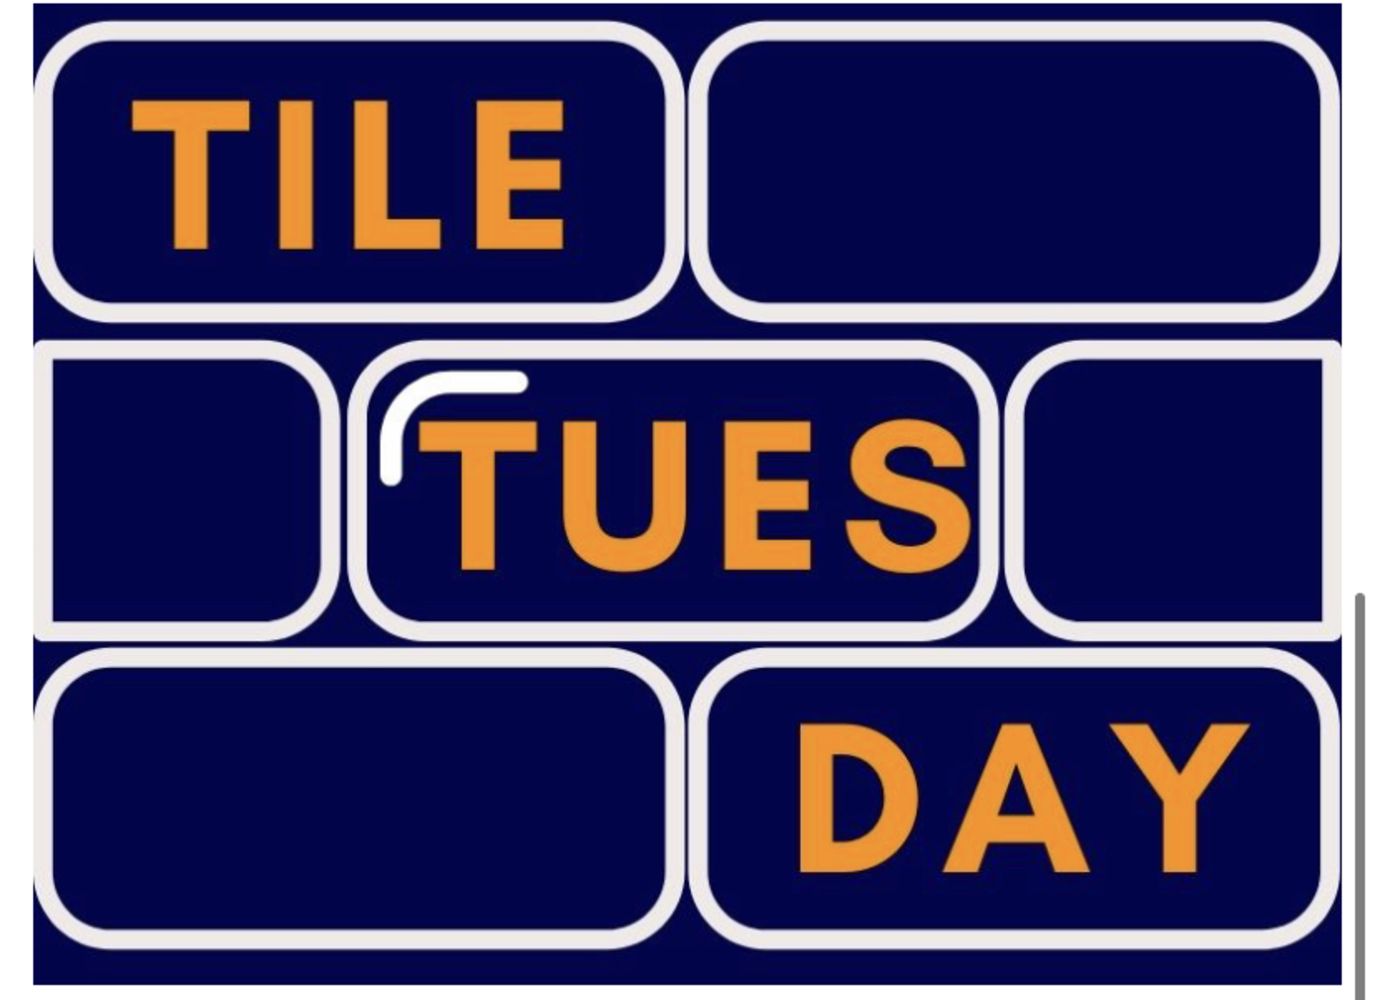 No Reserve - Tile Tuesday - “over £80k worth of tiles – Sourced from Johnsons Tiles” - 2nd March